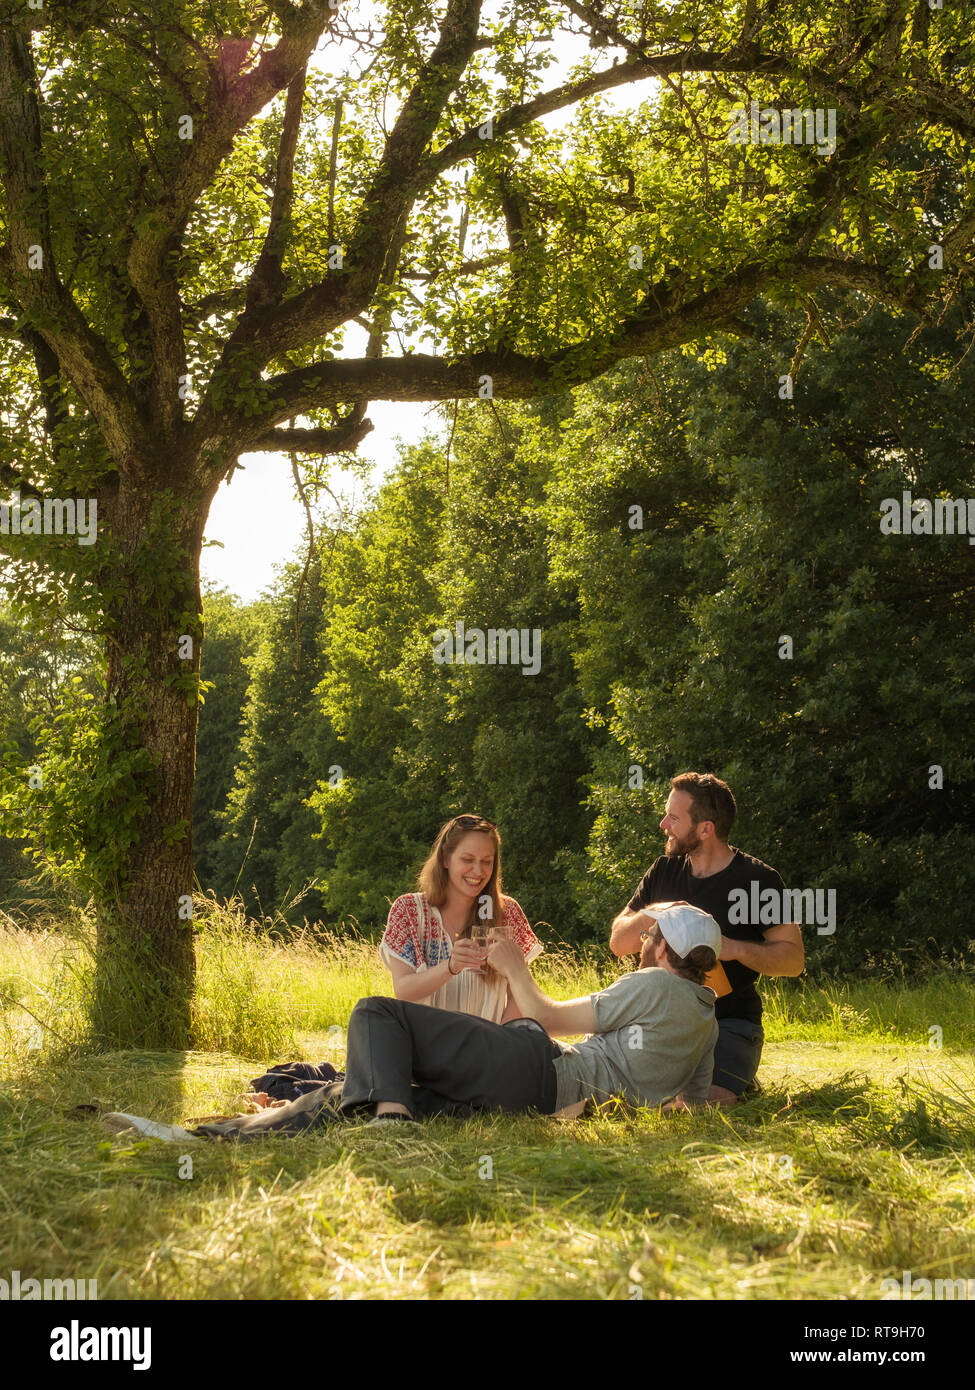 Three friends drinking wine together in a park Stock Photo